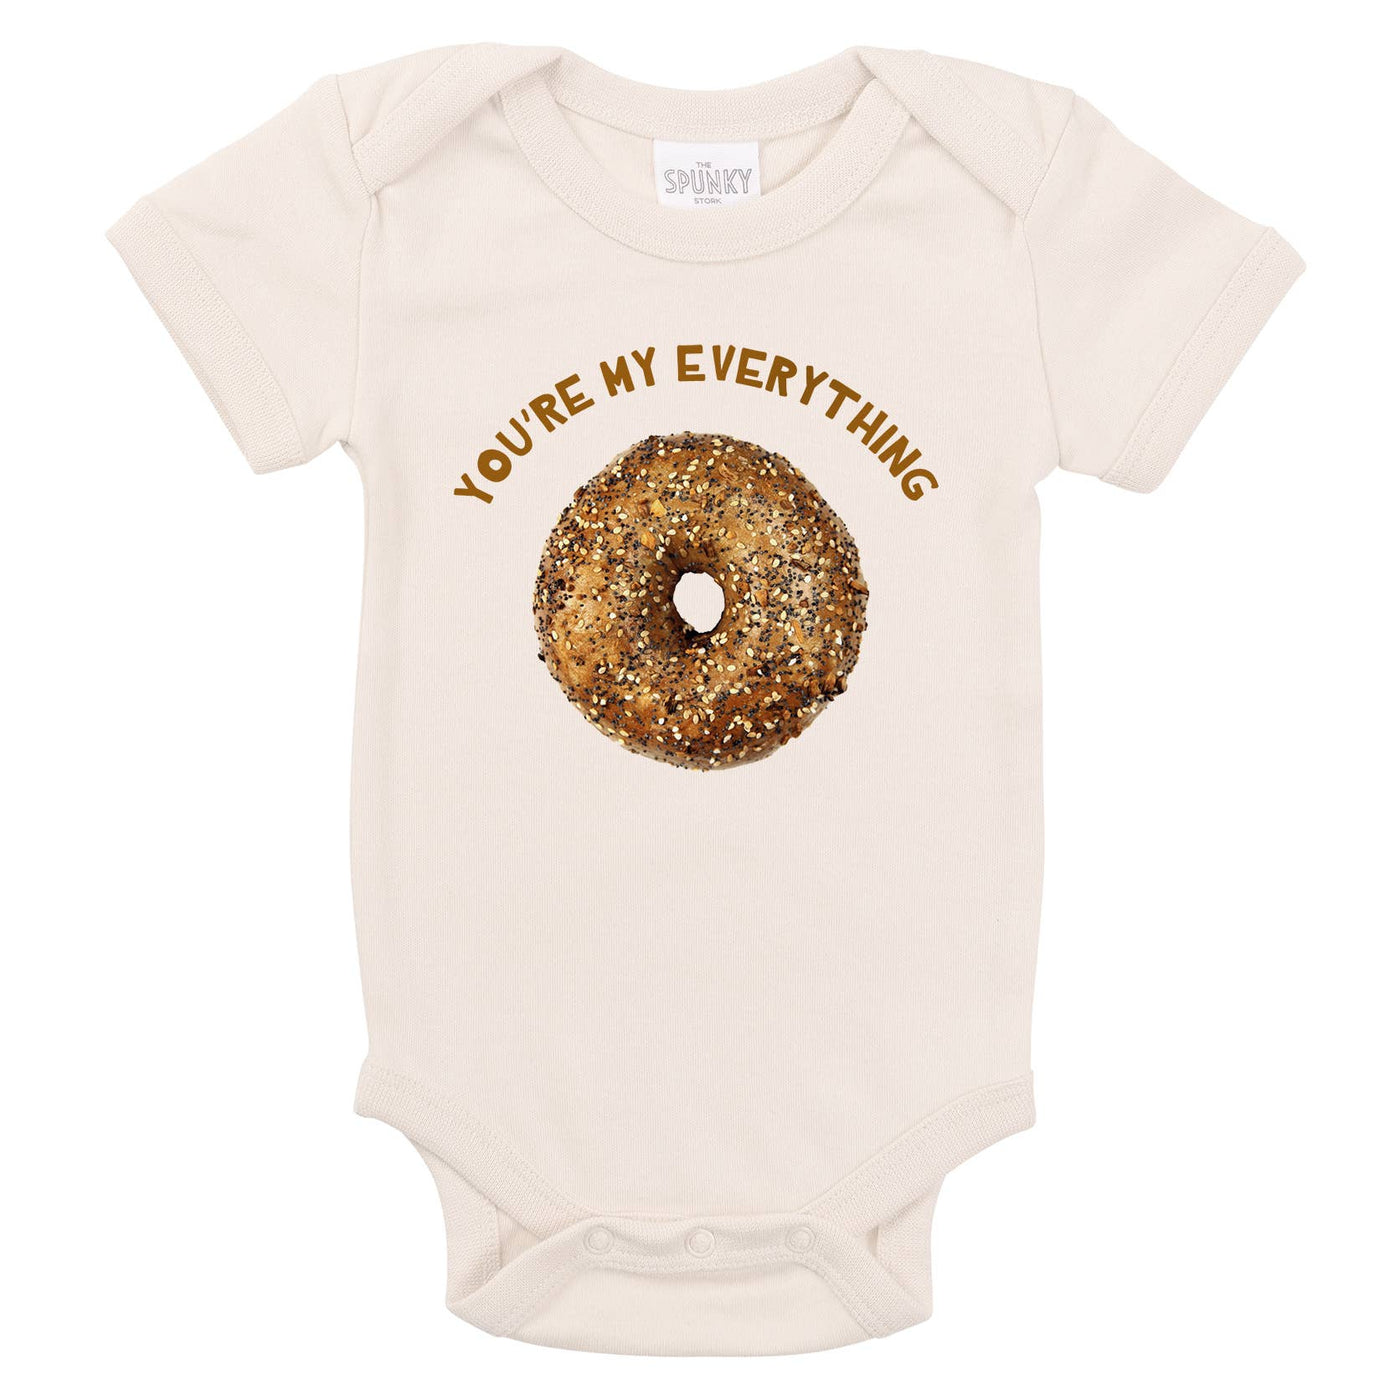 You Are My Everything Bagel Funny Organic Baby Toddler Shirt